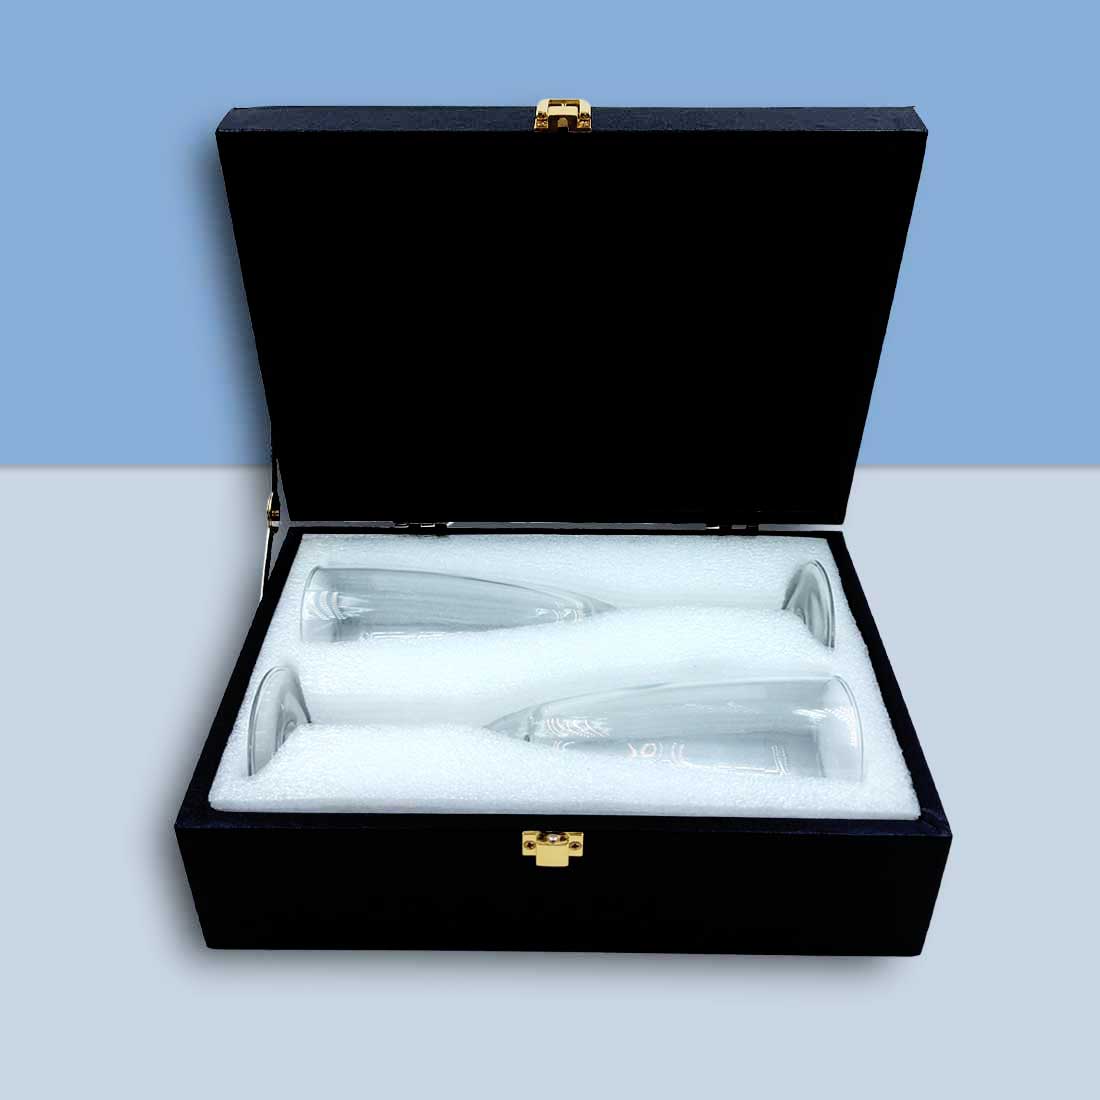 Custom Champagne Flute Glass Set of 2 with Gift Box - Available in Black / Pink Boxes